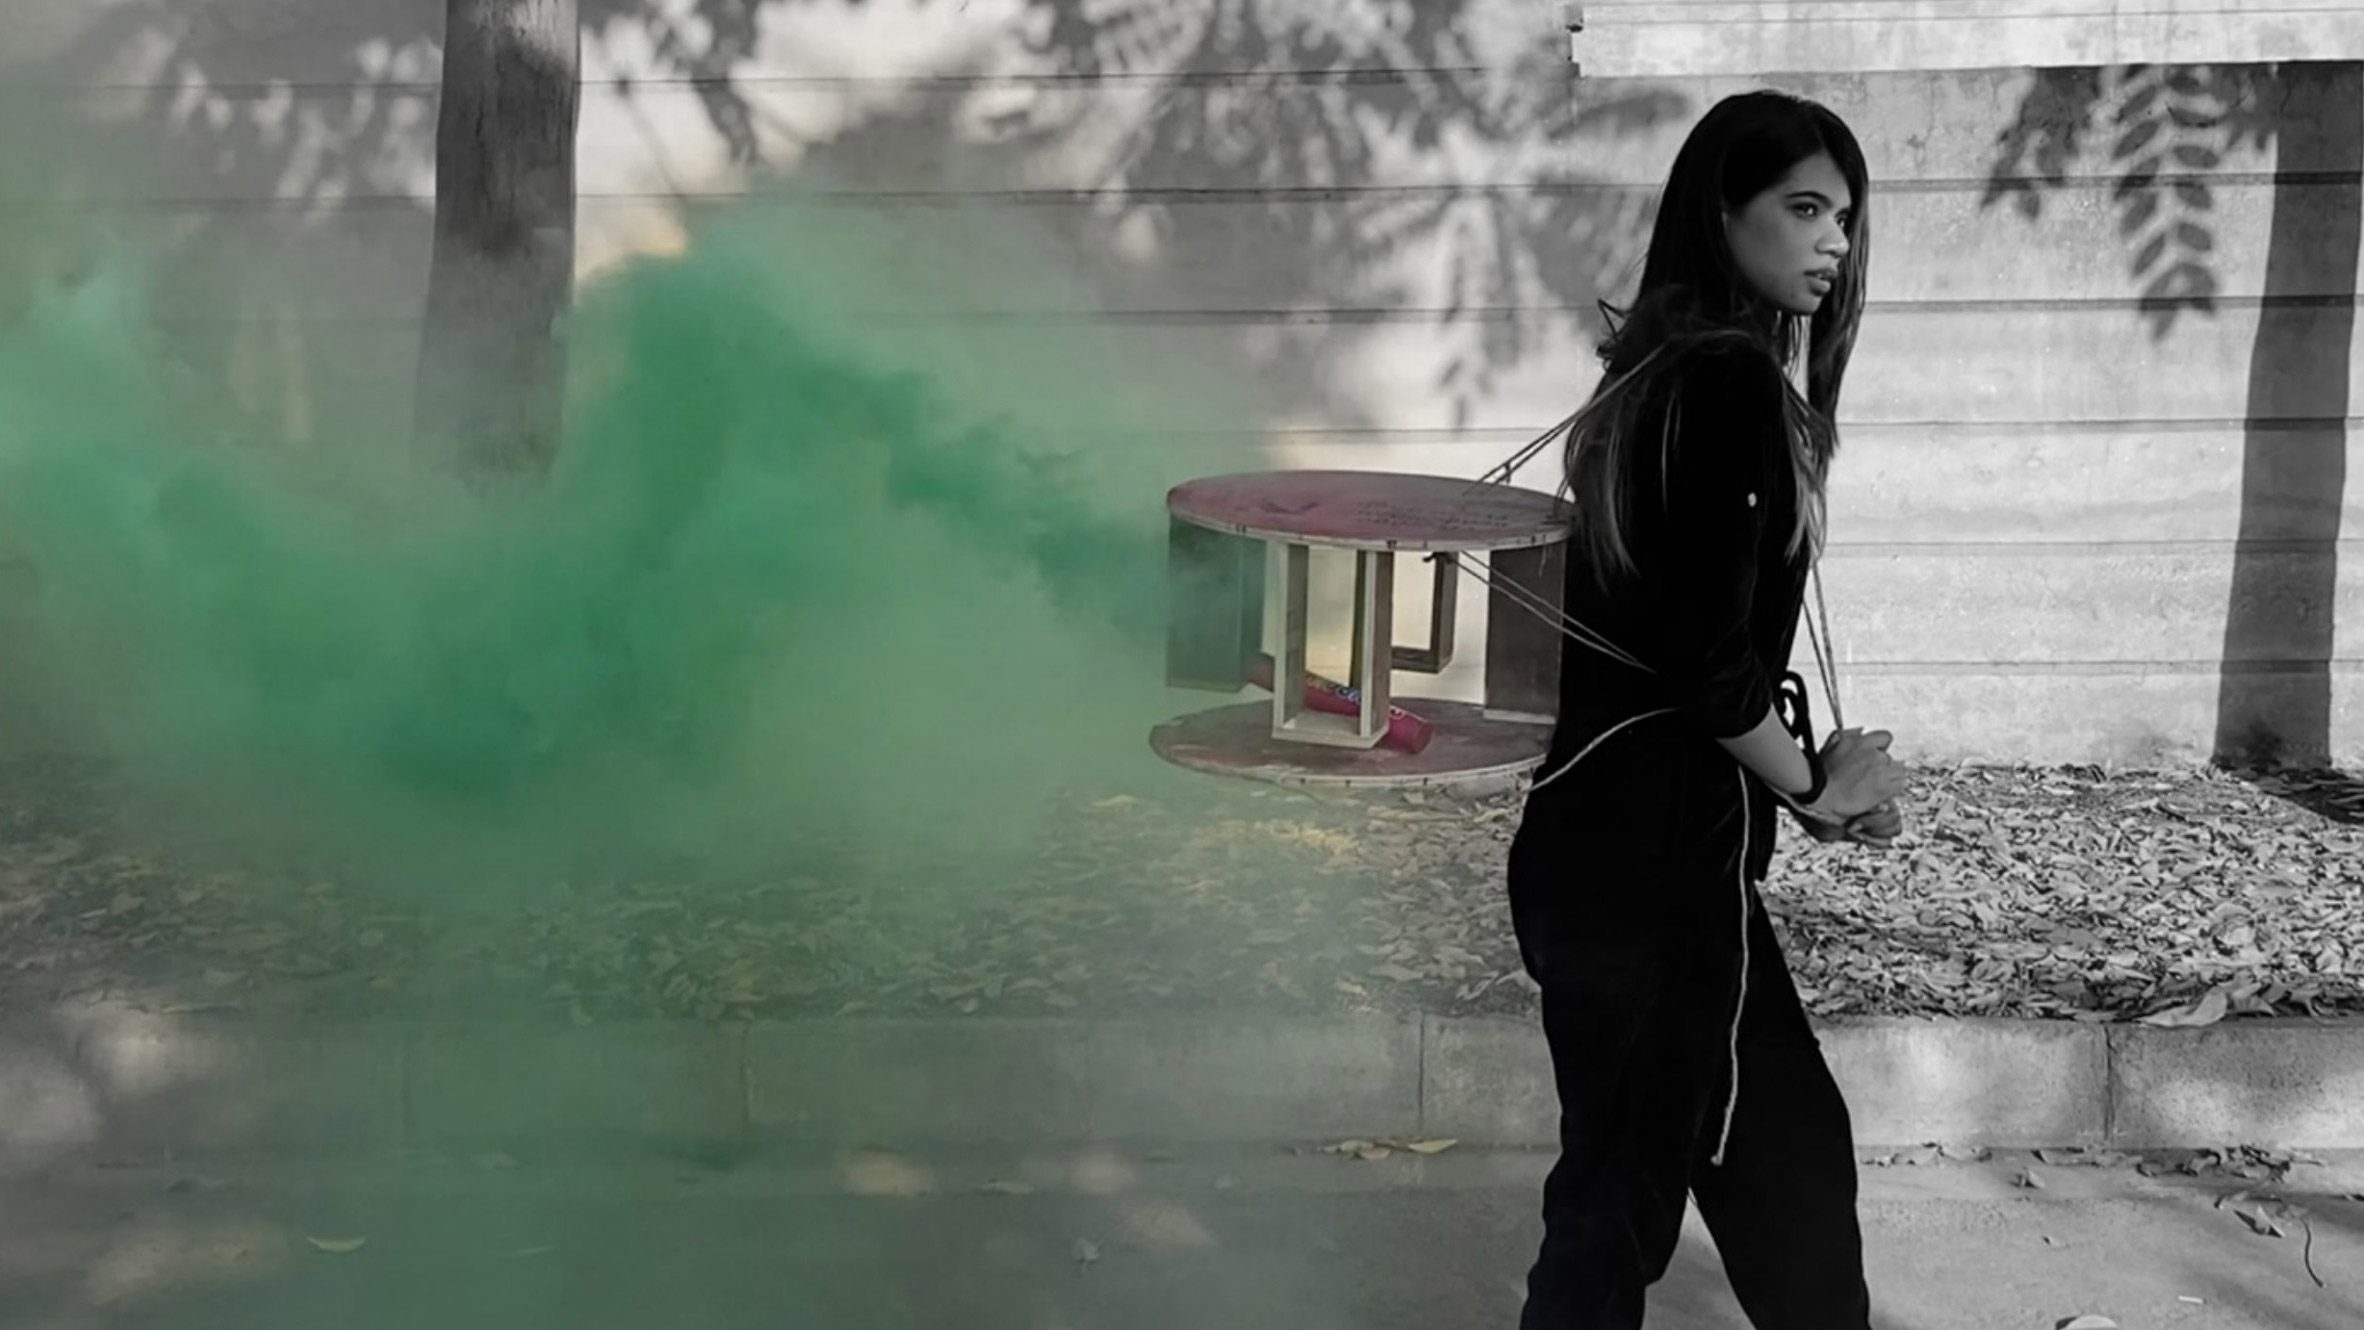 Black and white image of a girl with green smoke following by Interior Design MA at University of East London